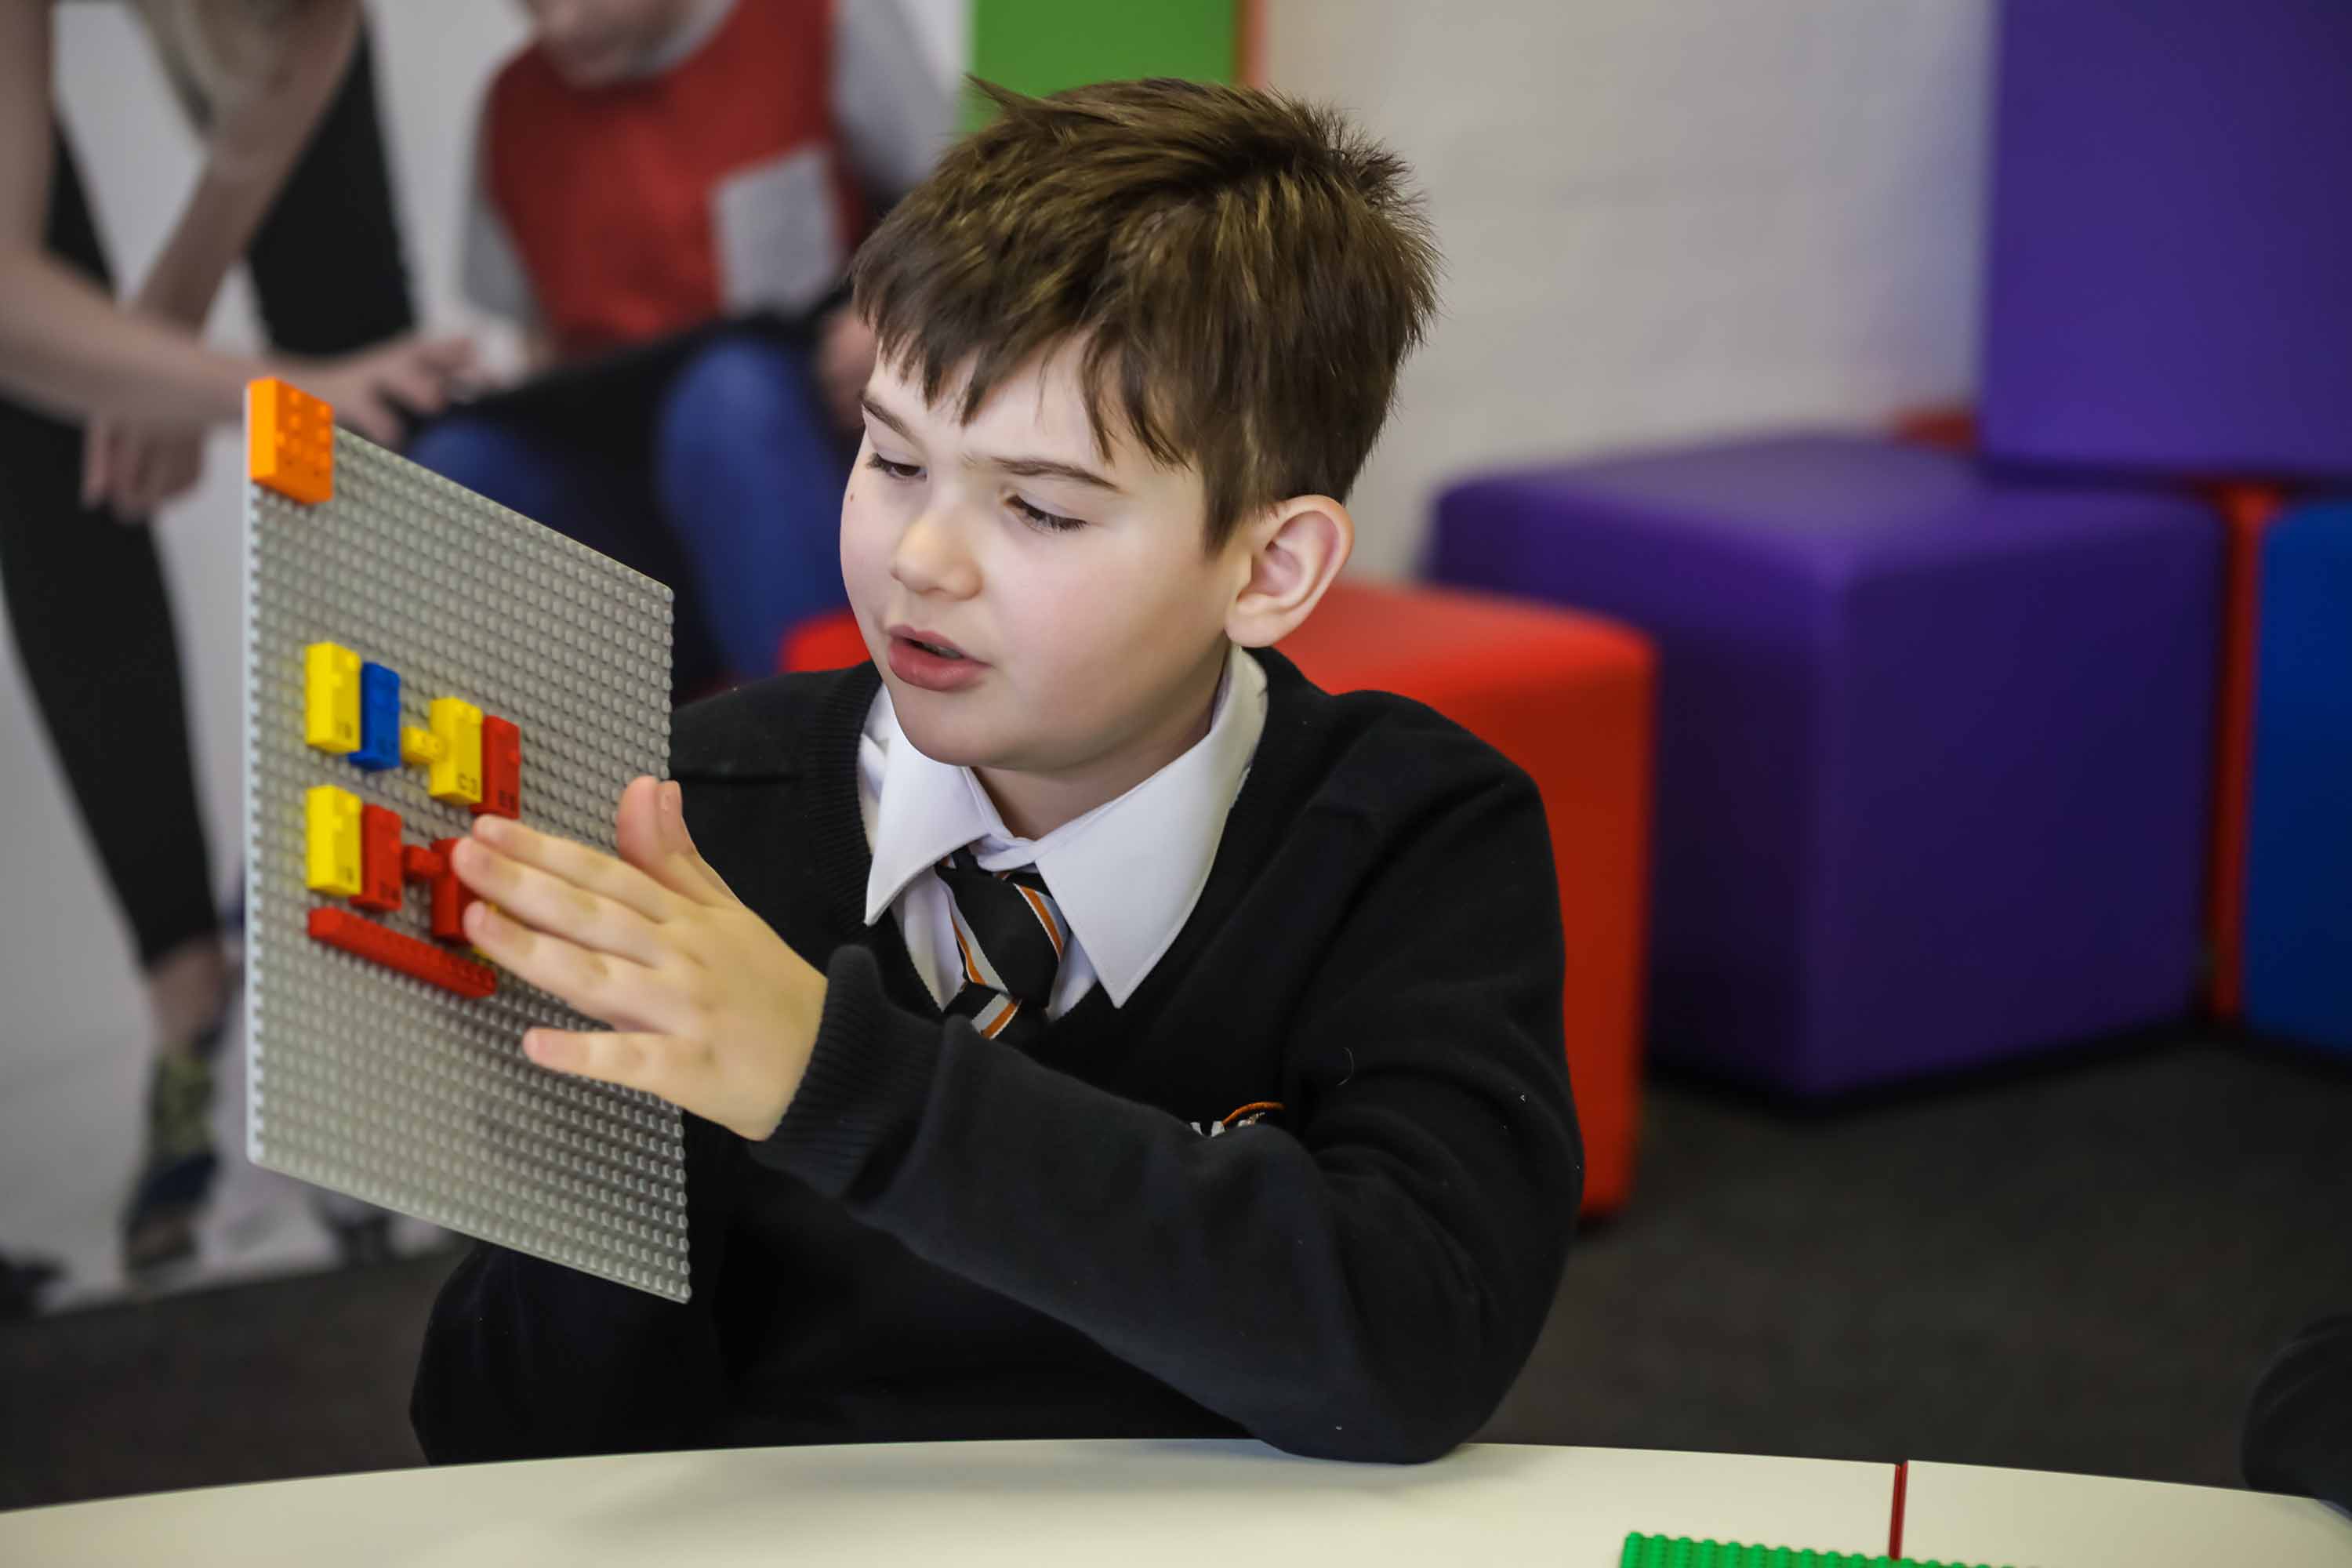 Lego releases Braille bricks to teach blind and visually impaired